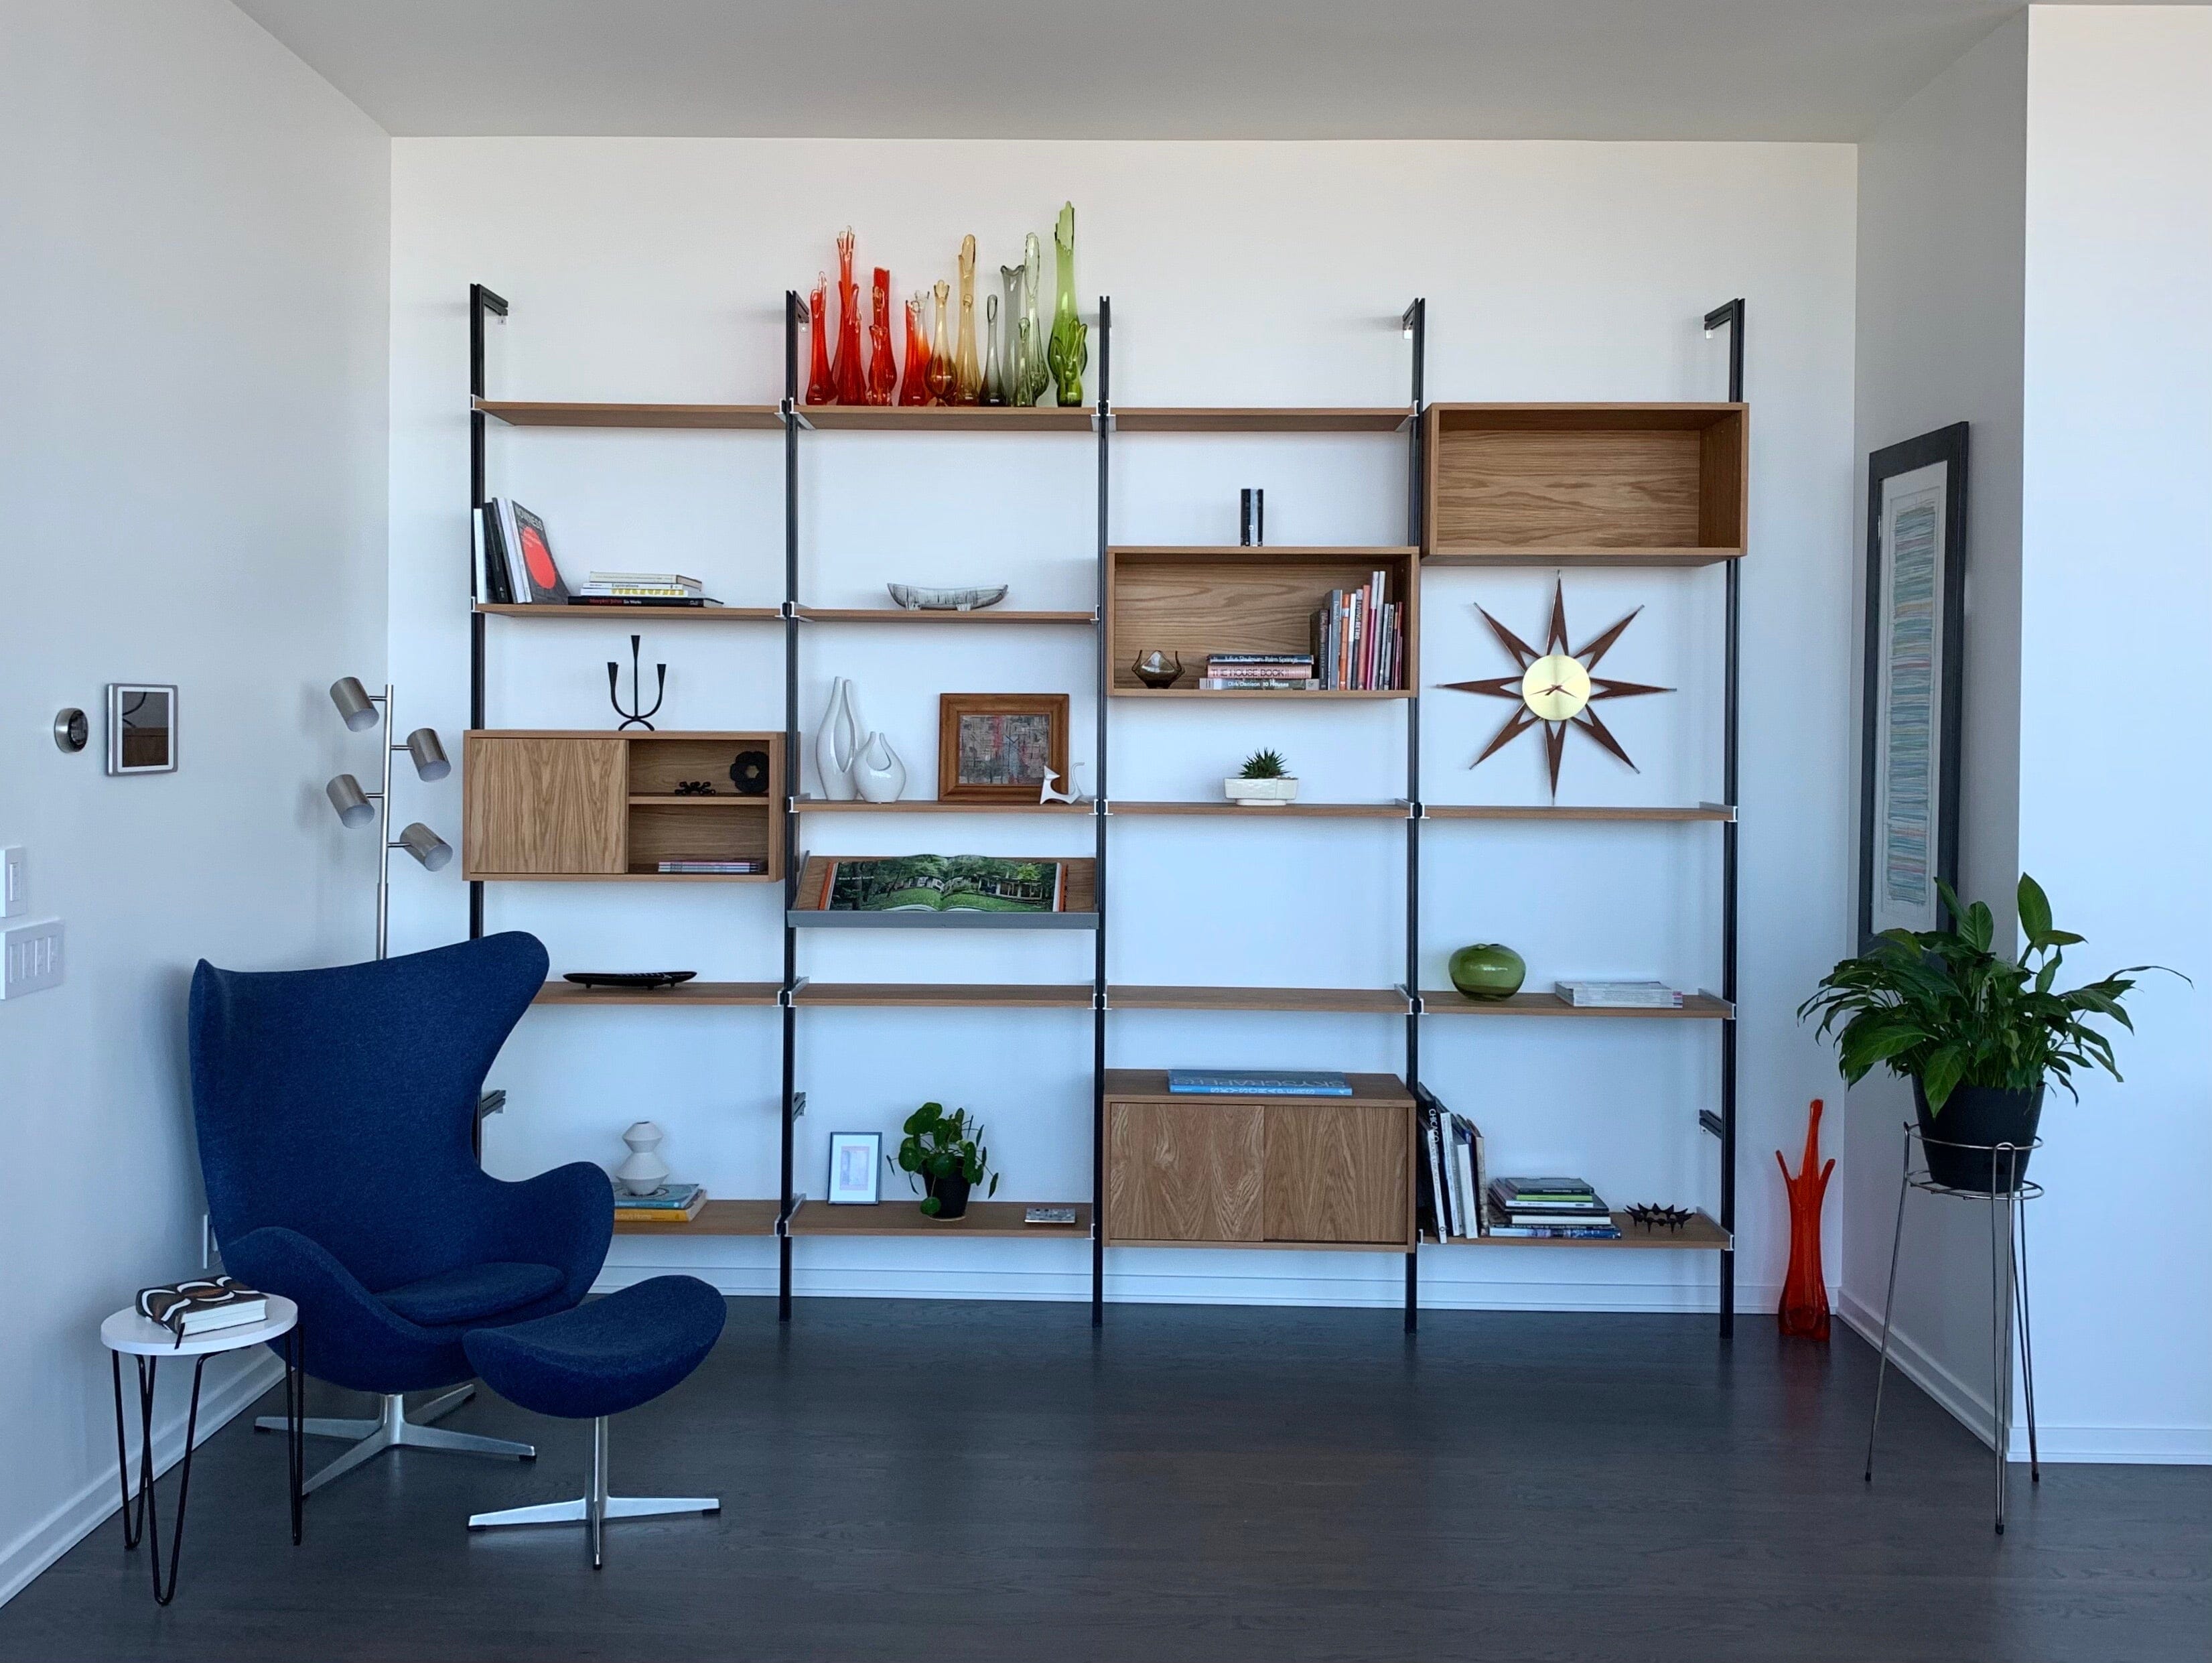 Chicago Couple Uses Shelves to Create Their Dream Space